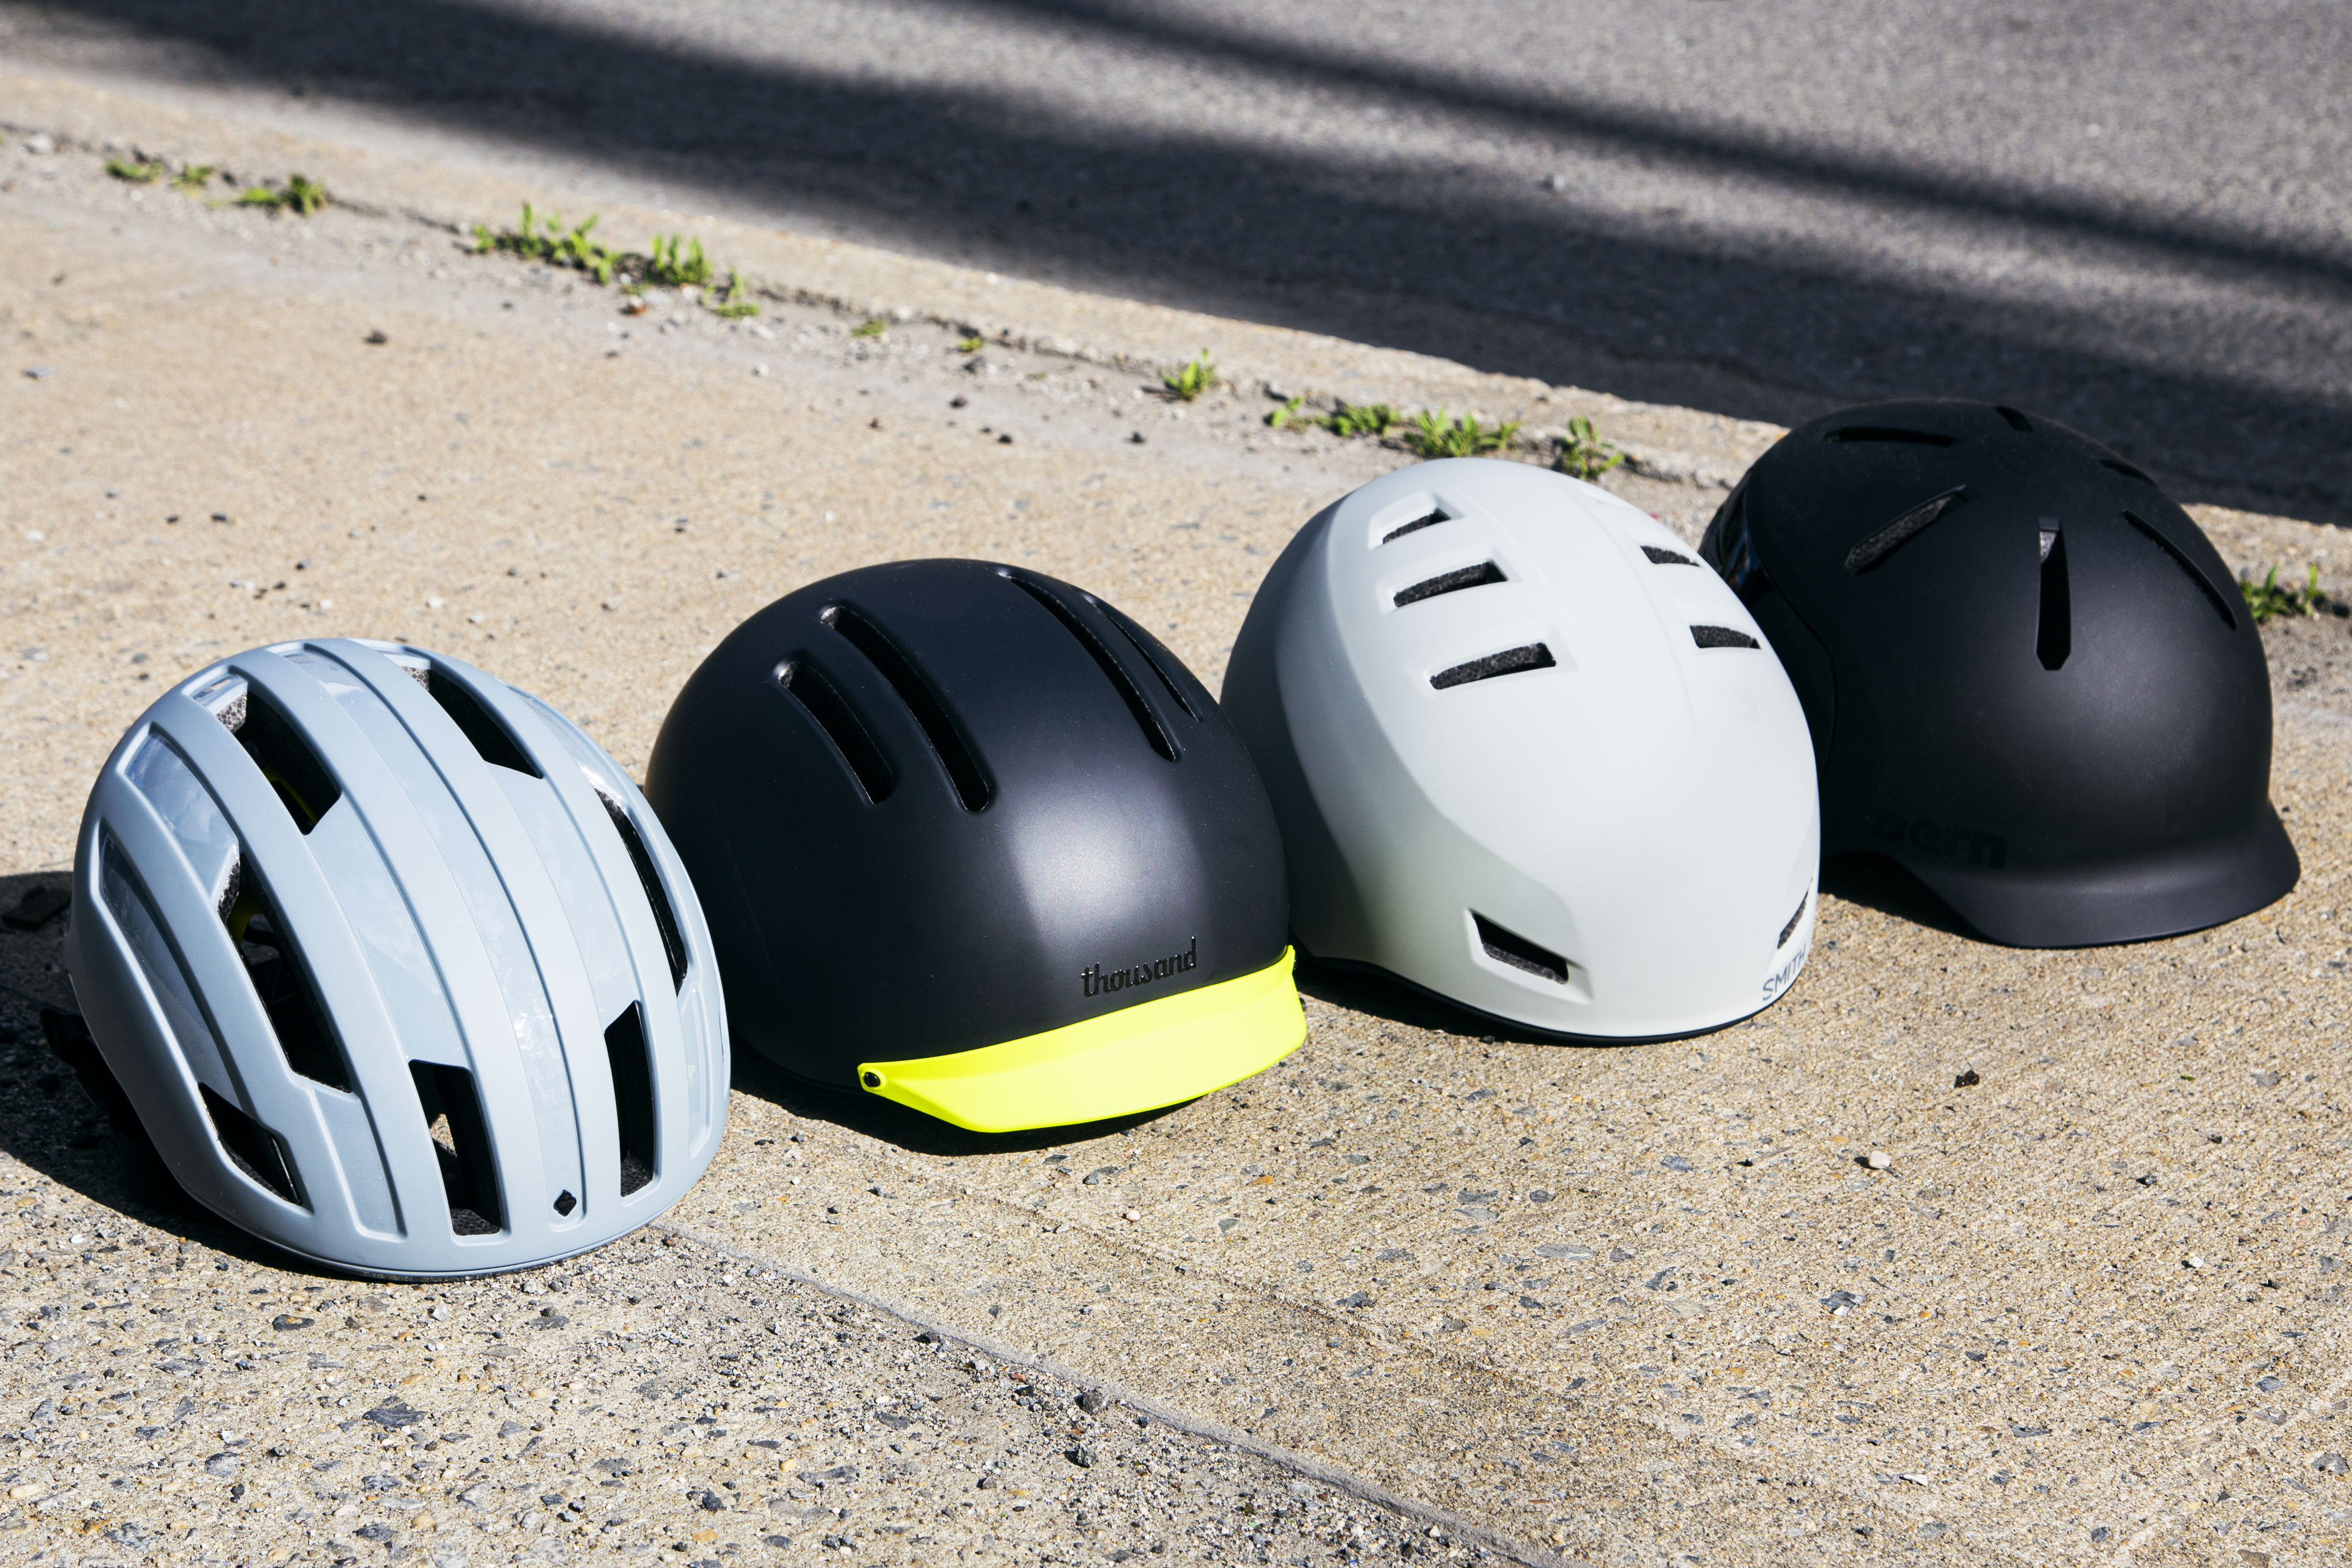 Four stylish, modern bicycle helmets — by Sweet Protection, Thousand, Smith and Bern, respectively — situated in a row on the sidewalk